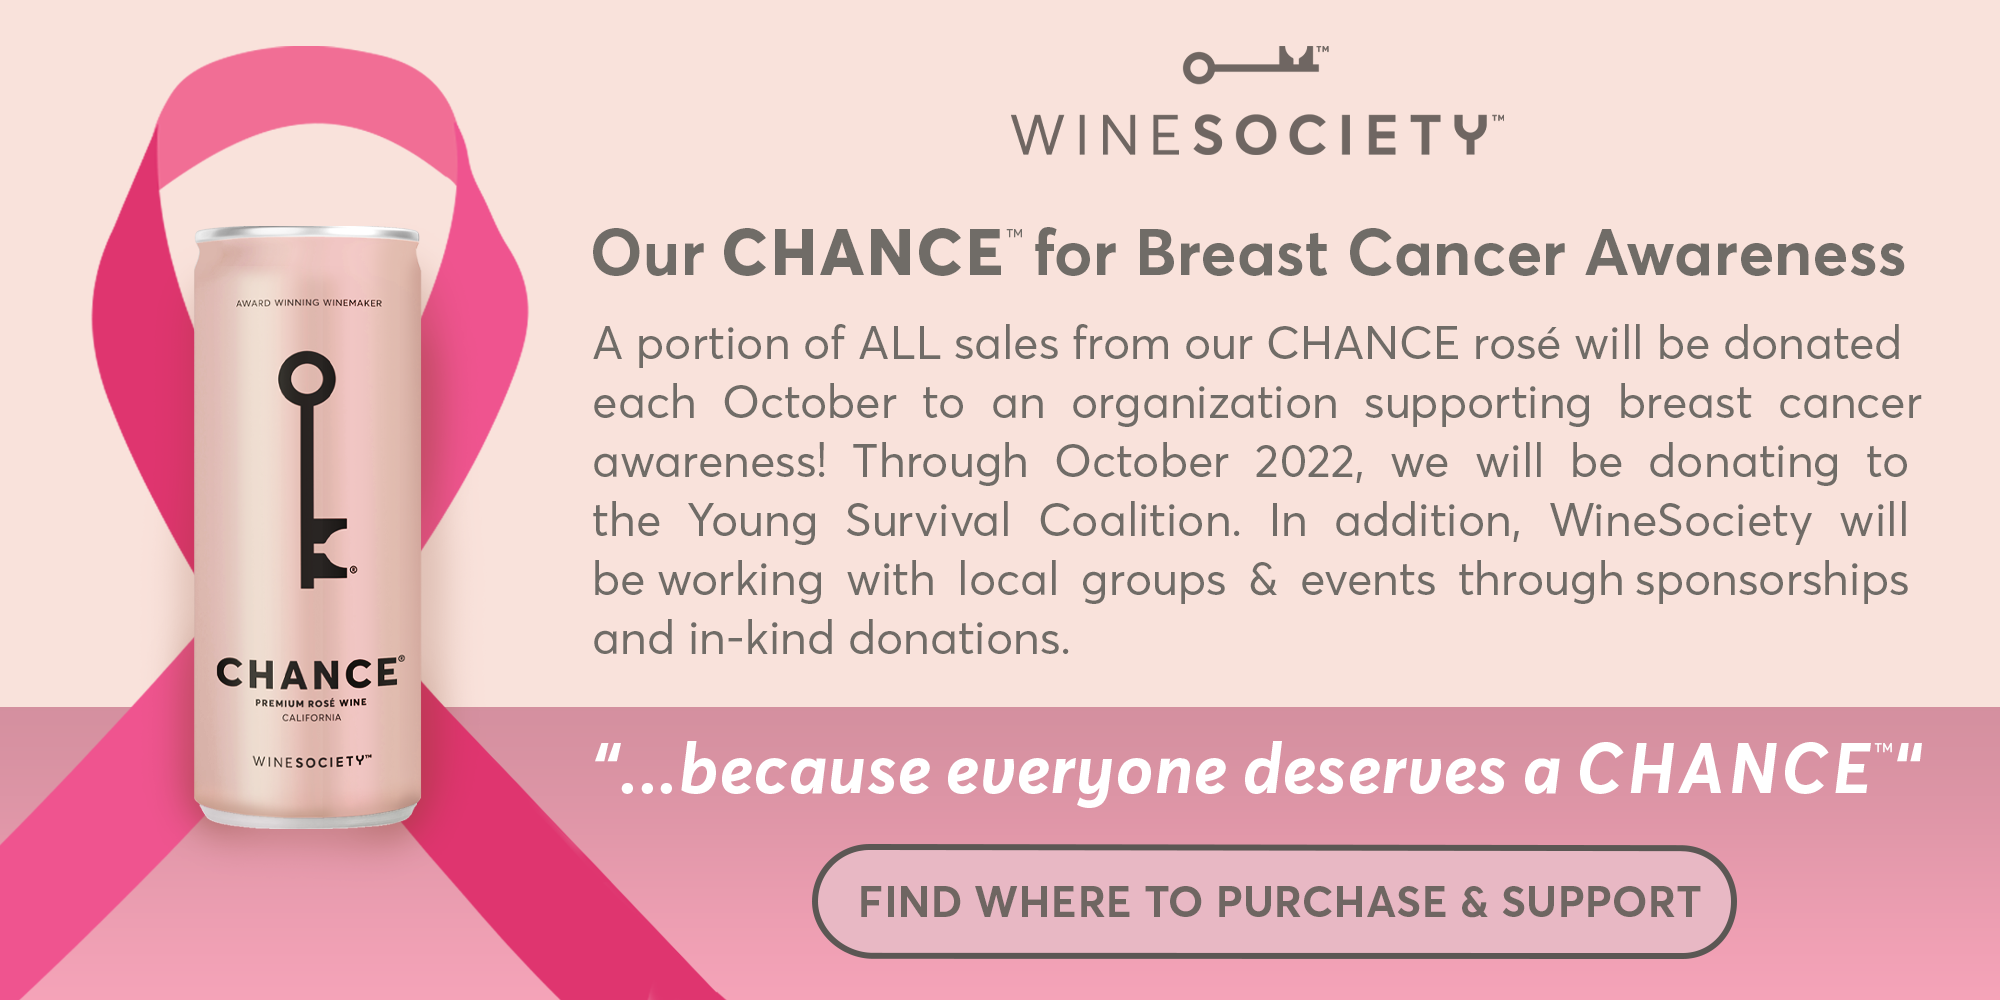 Your CHANCE to give back and give everyone a CHANCE with WineSociety